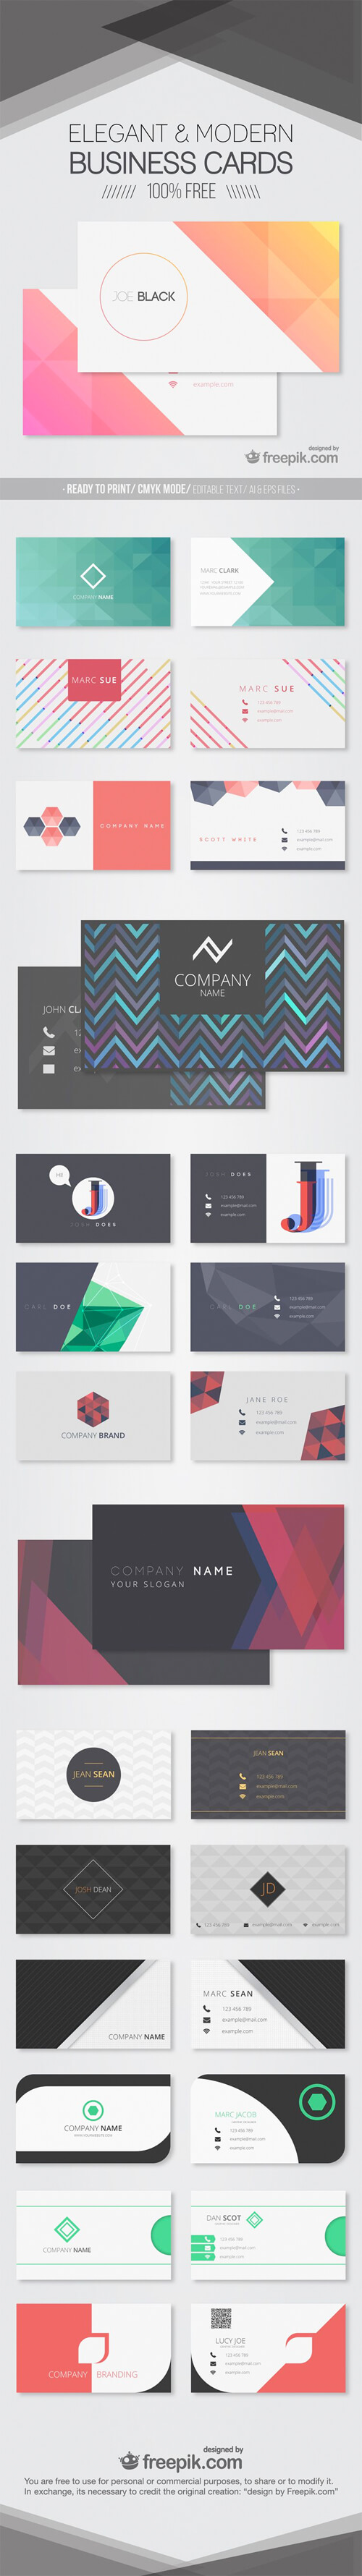 free-template-business-cards66